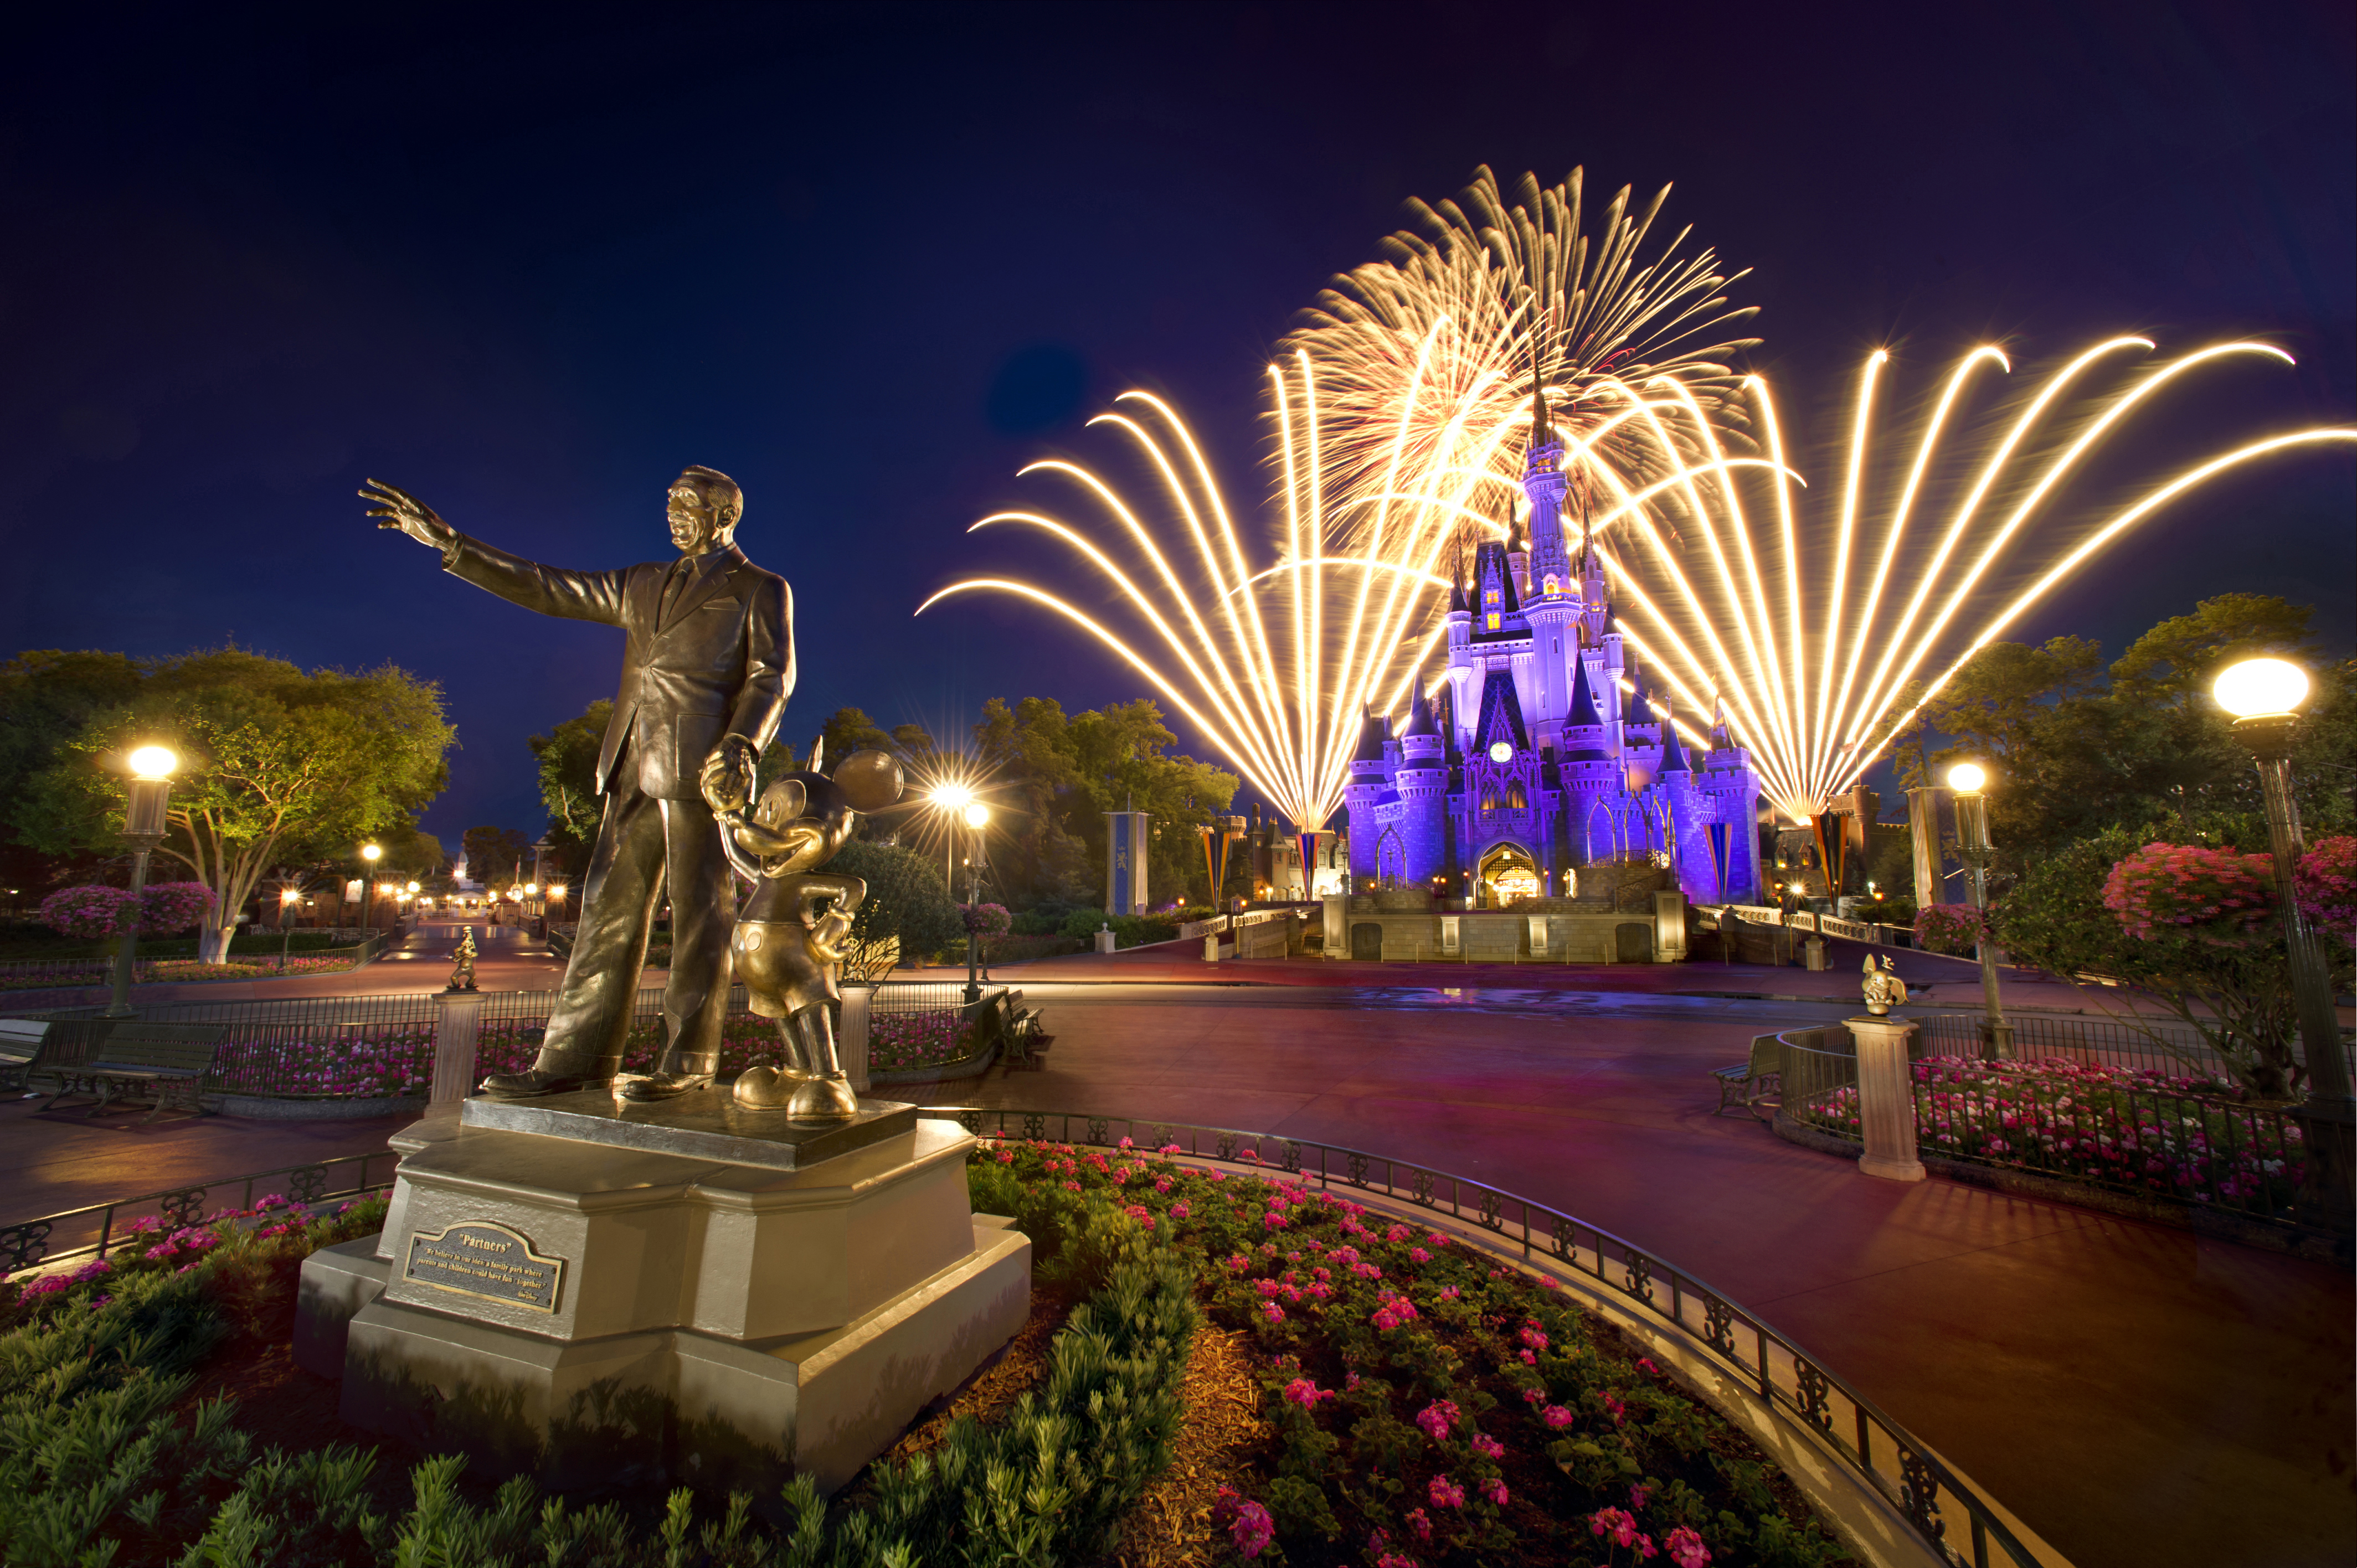 Nighttime view of gold Walt and Mickey statue in front of purple-lit Cinderella Castle with bright fireworks going off behind the castle at Disney's Magic Kingdom. Surrounding everything are trees and pink flowers in the landscaping.